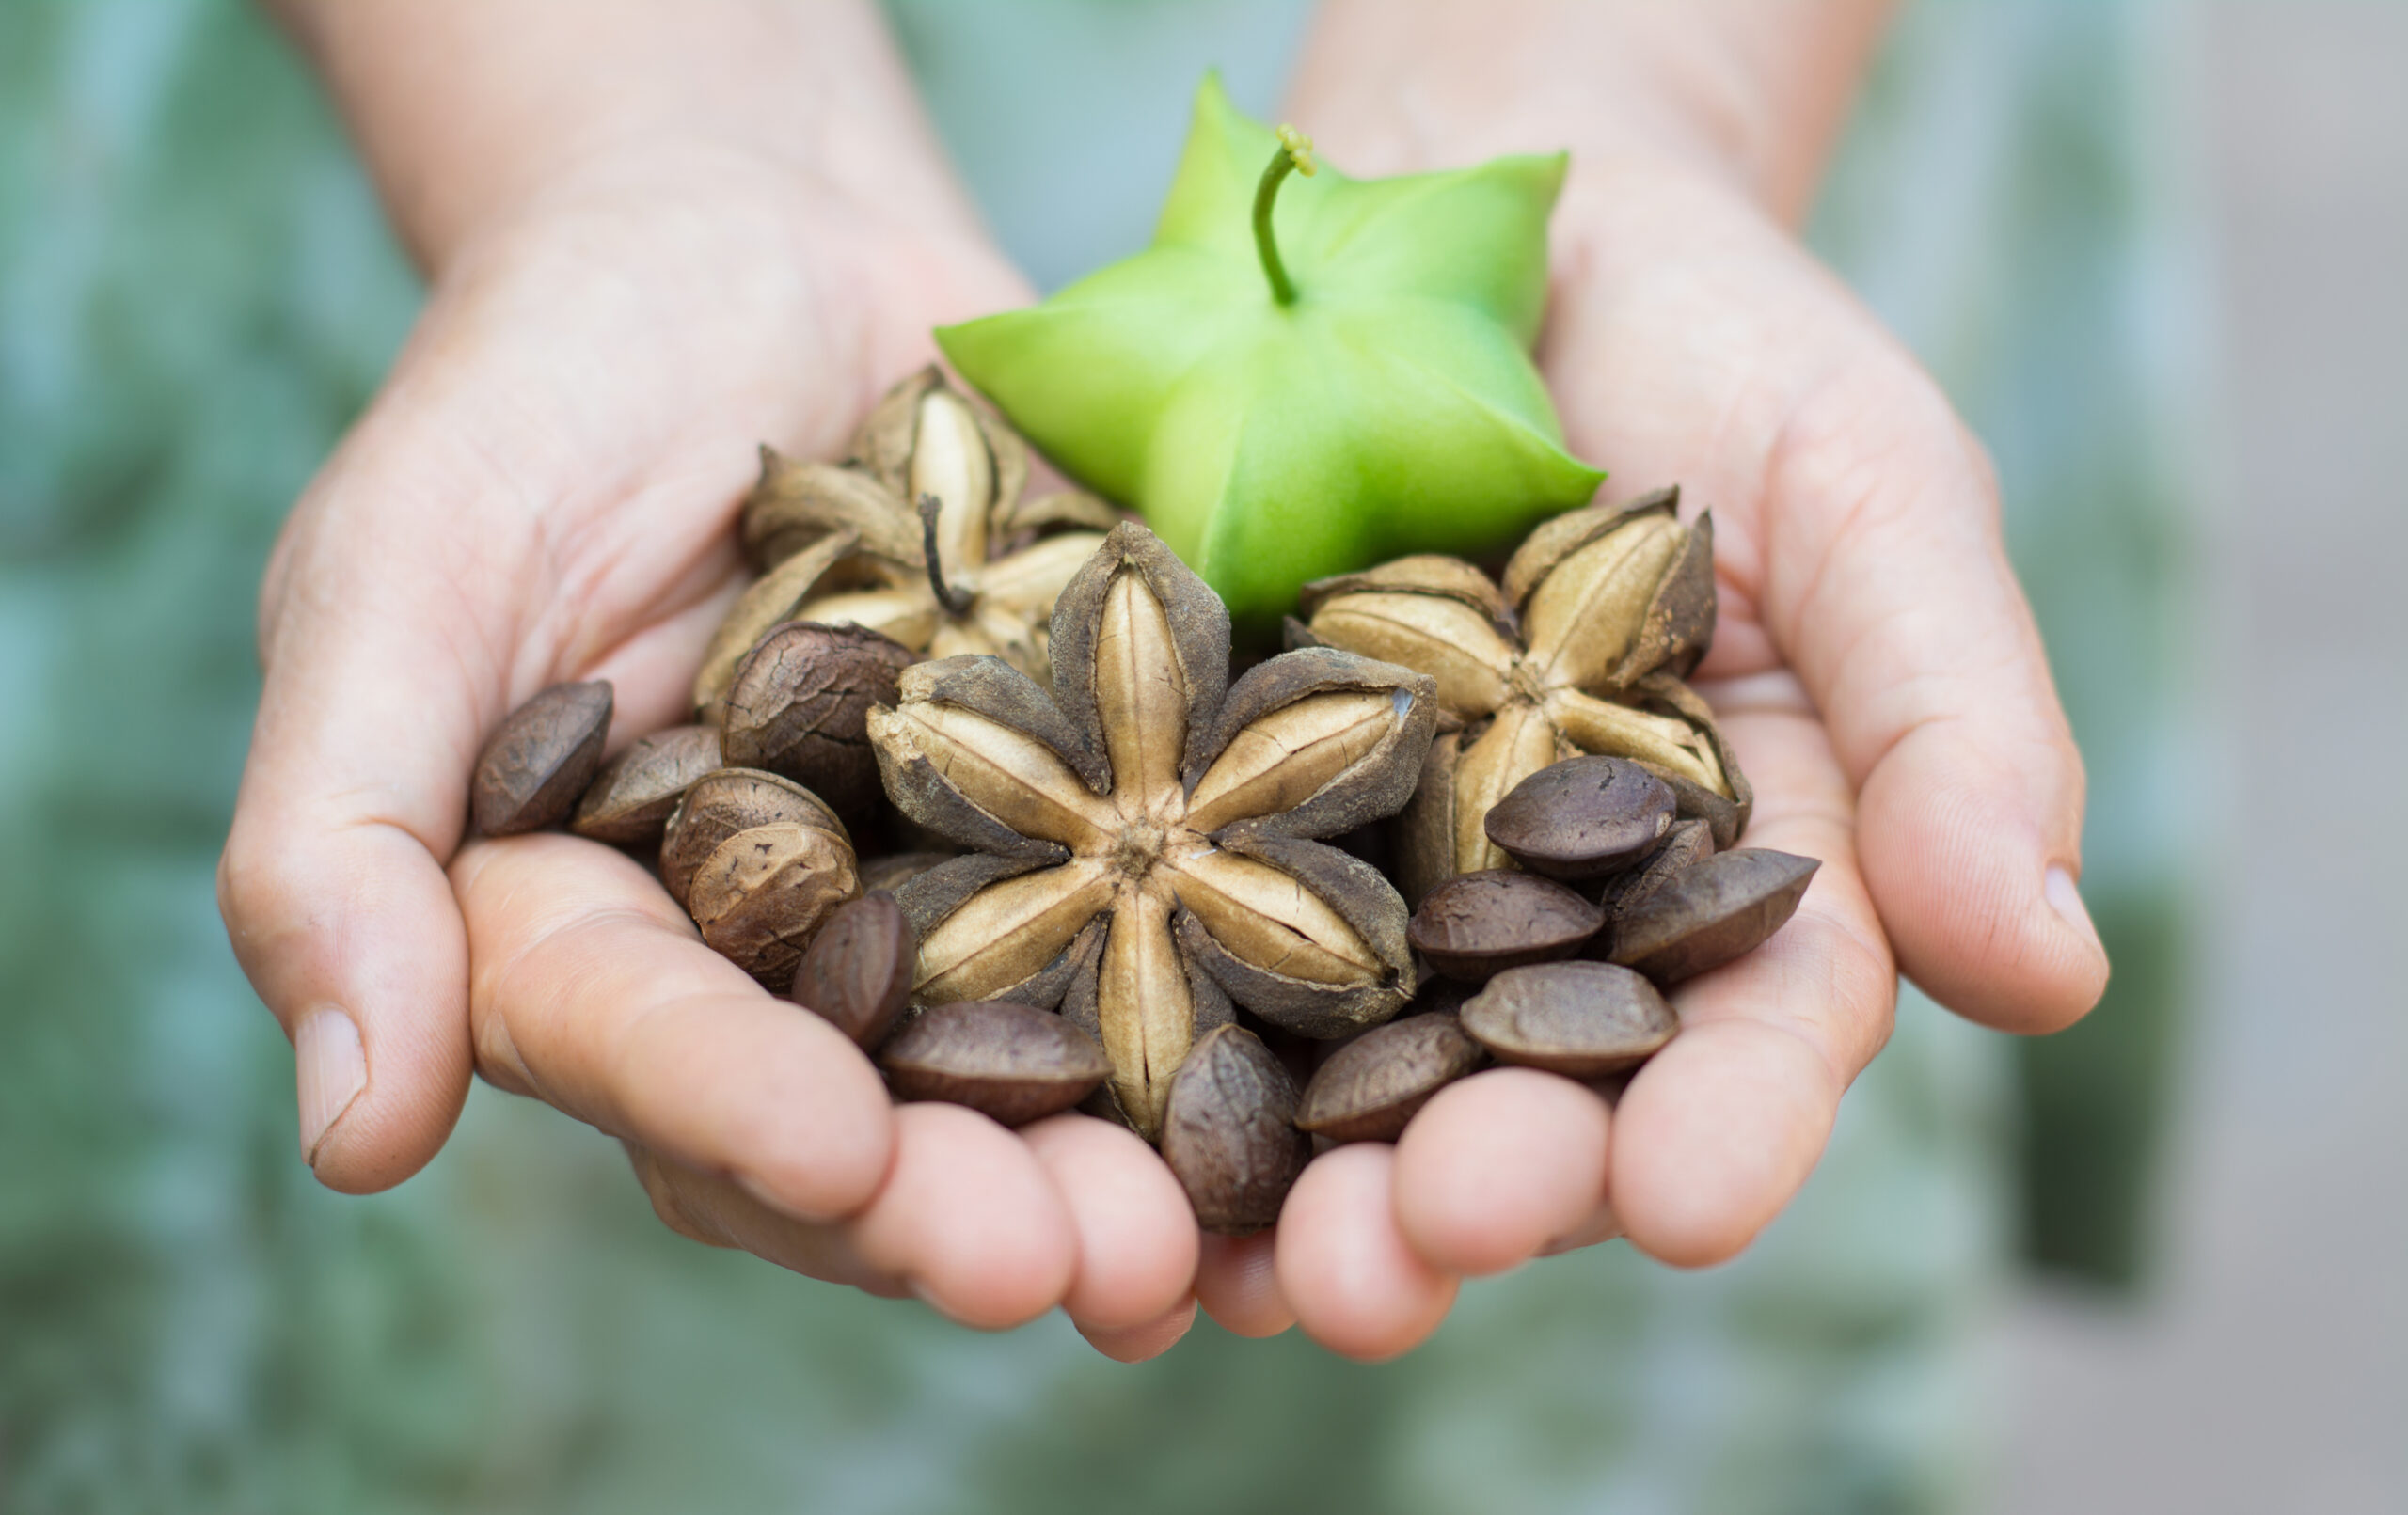 Image of sacha inchi peanut seed in hands